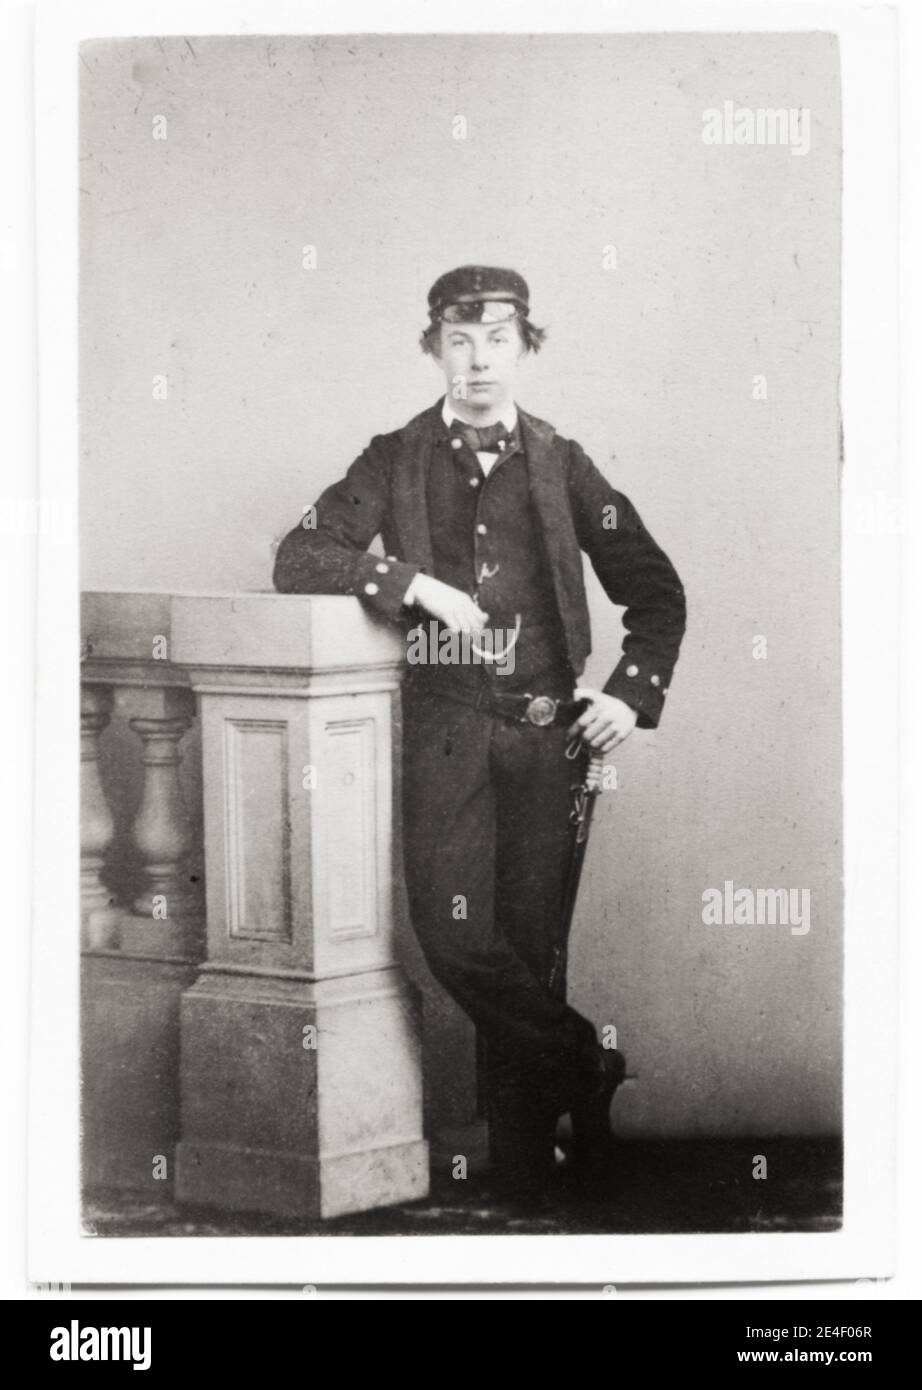 Vintage 19th century photograph: captioned on the back as Marquess of Queensbury. John Sholto Douglas, 9th Marquess of Queensberry (20 July 1844 – 31 January 1900), was a Scottish nobleman, remembered for his atheism, his outspoken views, his brutish manner, for lending his name to the 'Queensberry Rules' that form the basis of modern boxing, and for his role in the downfall of the Irish author and playwright Oscar Wilde. Carte de visite portrait c.1860, making the sitter around 16, which would appear correct. Stock Photo